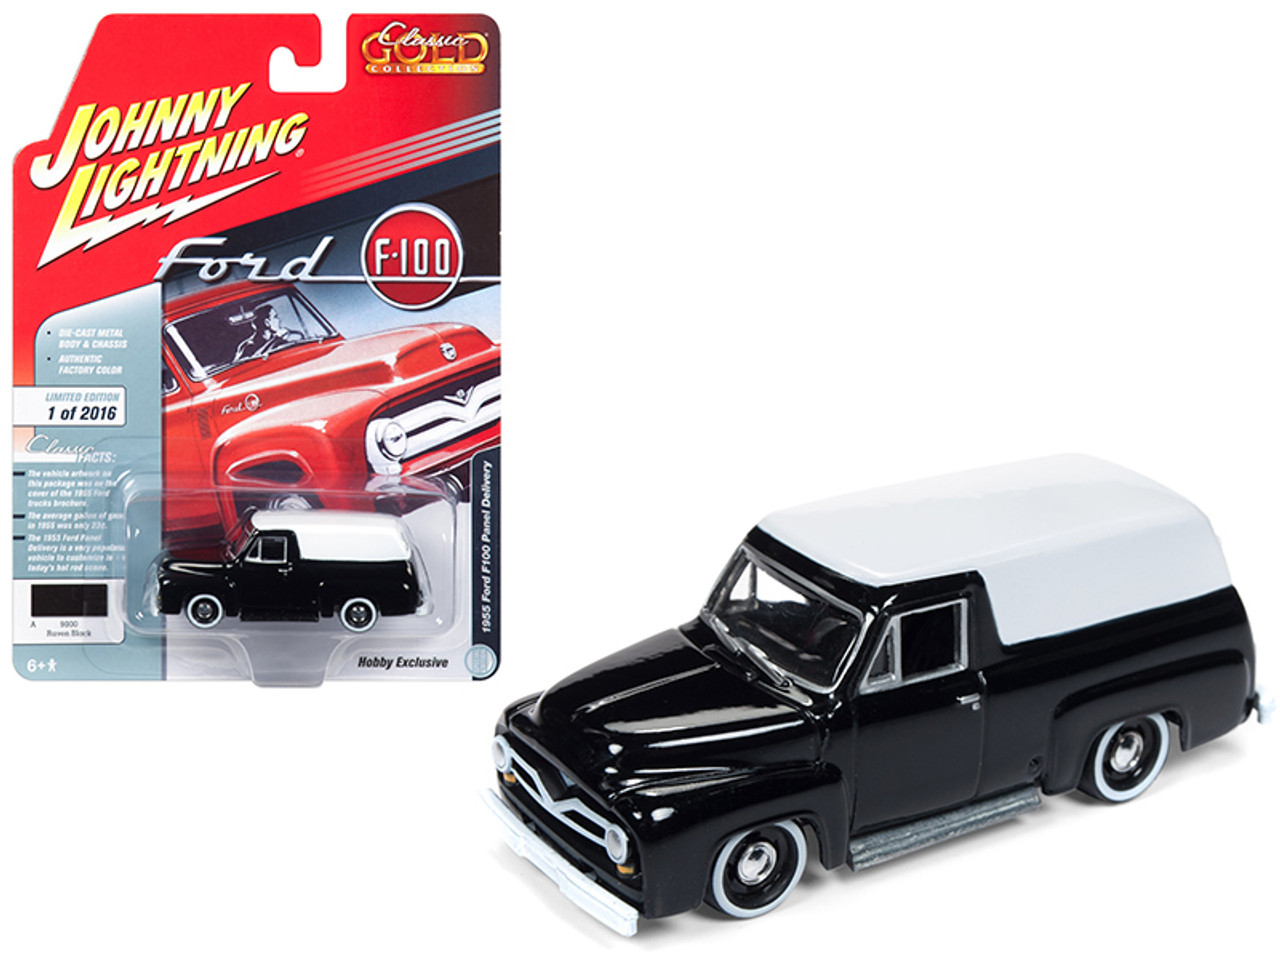 1955 Ford F100 Panel Delivery Gloss Black with White Top "Classic Gold" Limited Edition to 2,016 pieces Worldwide 1/64 Diecast Model Car by Johnny Lightning